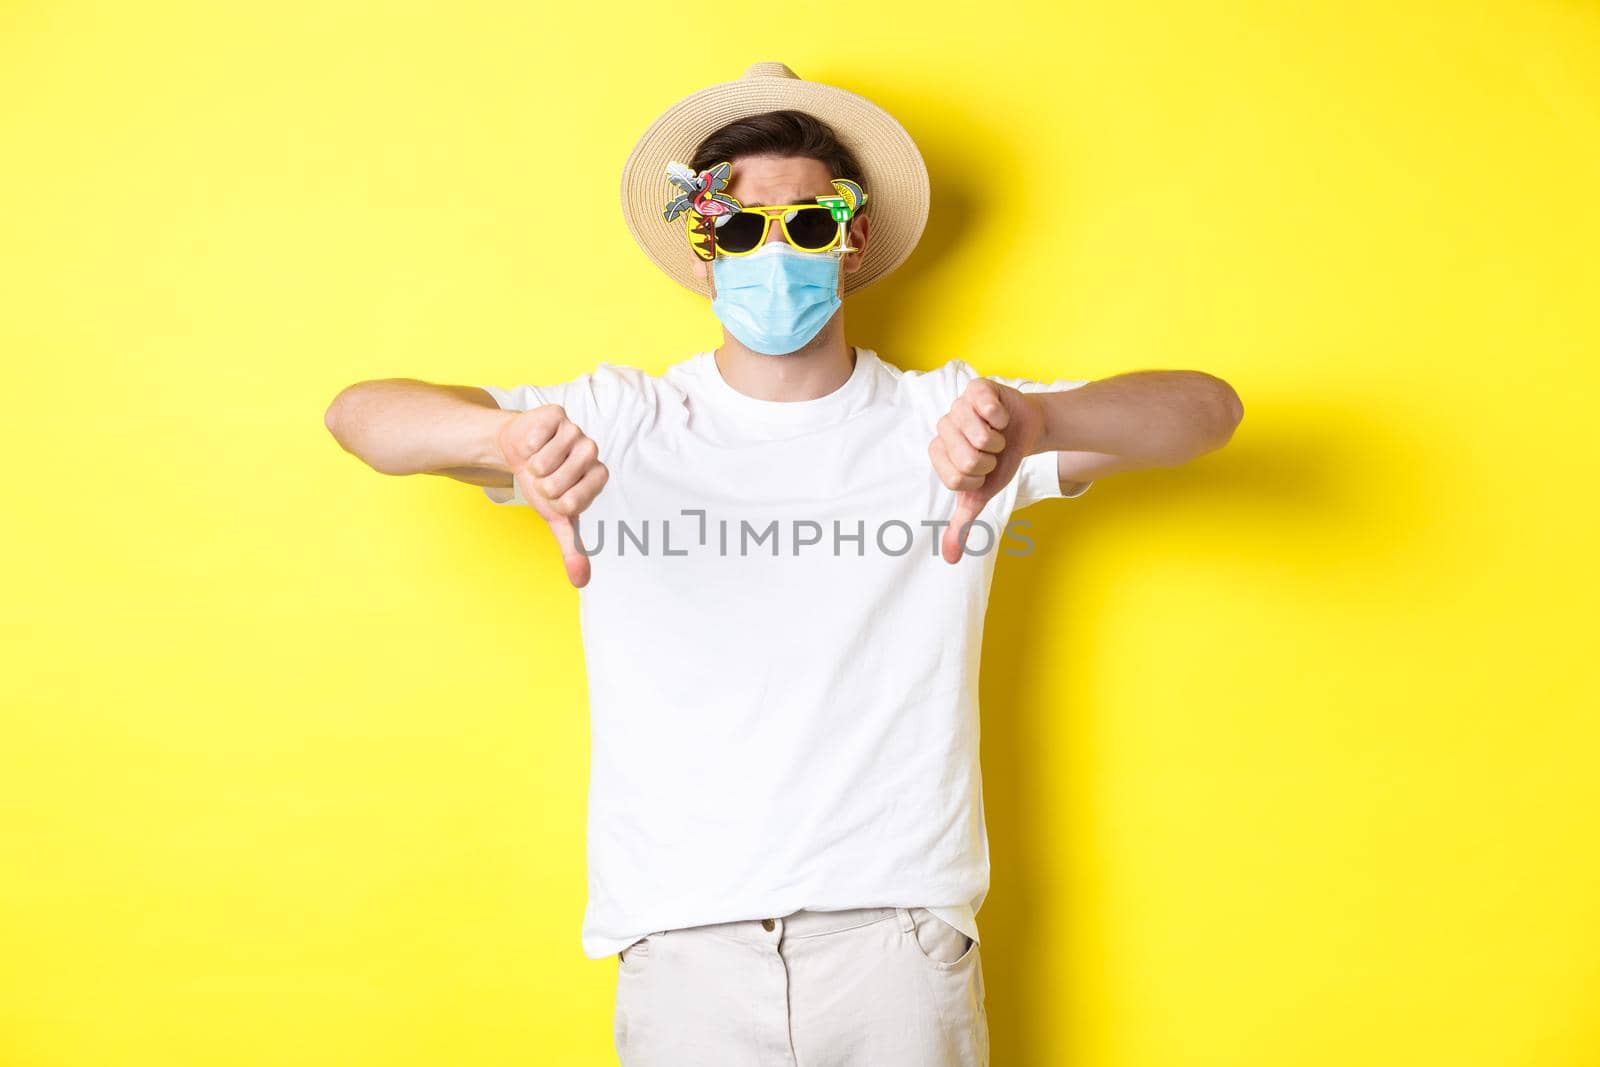 Concept of covid, vacation and tourism. Disappointed tourist complaining on lockdown during pandemic, wearing medical mask and sunglasses, showing thumbs down.